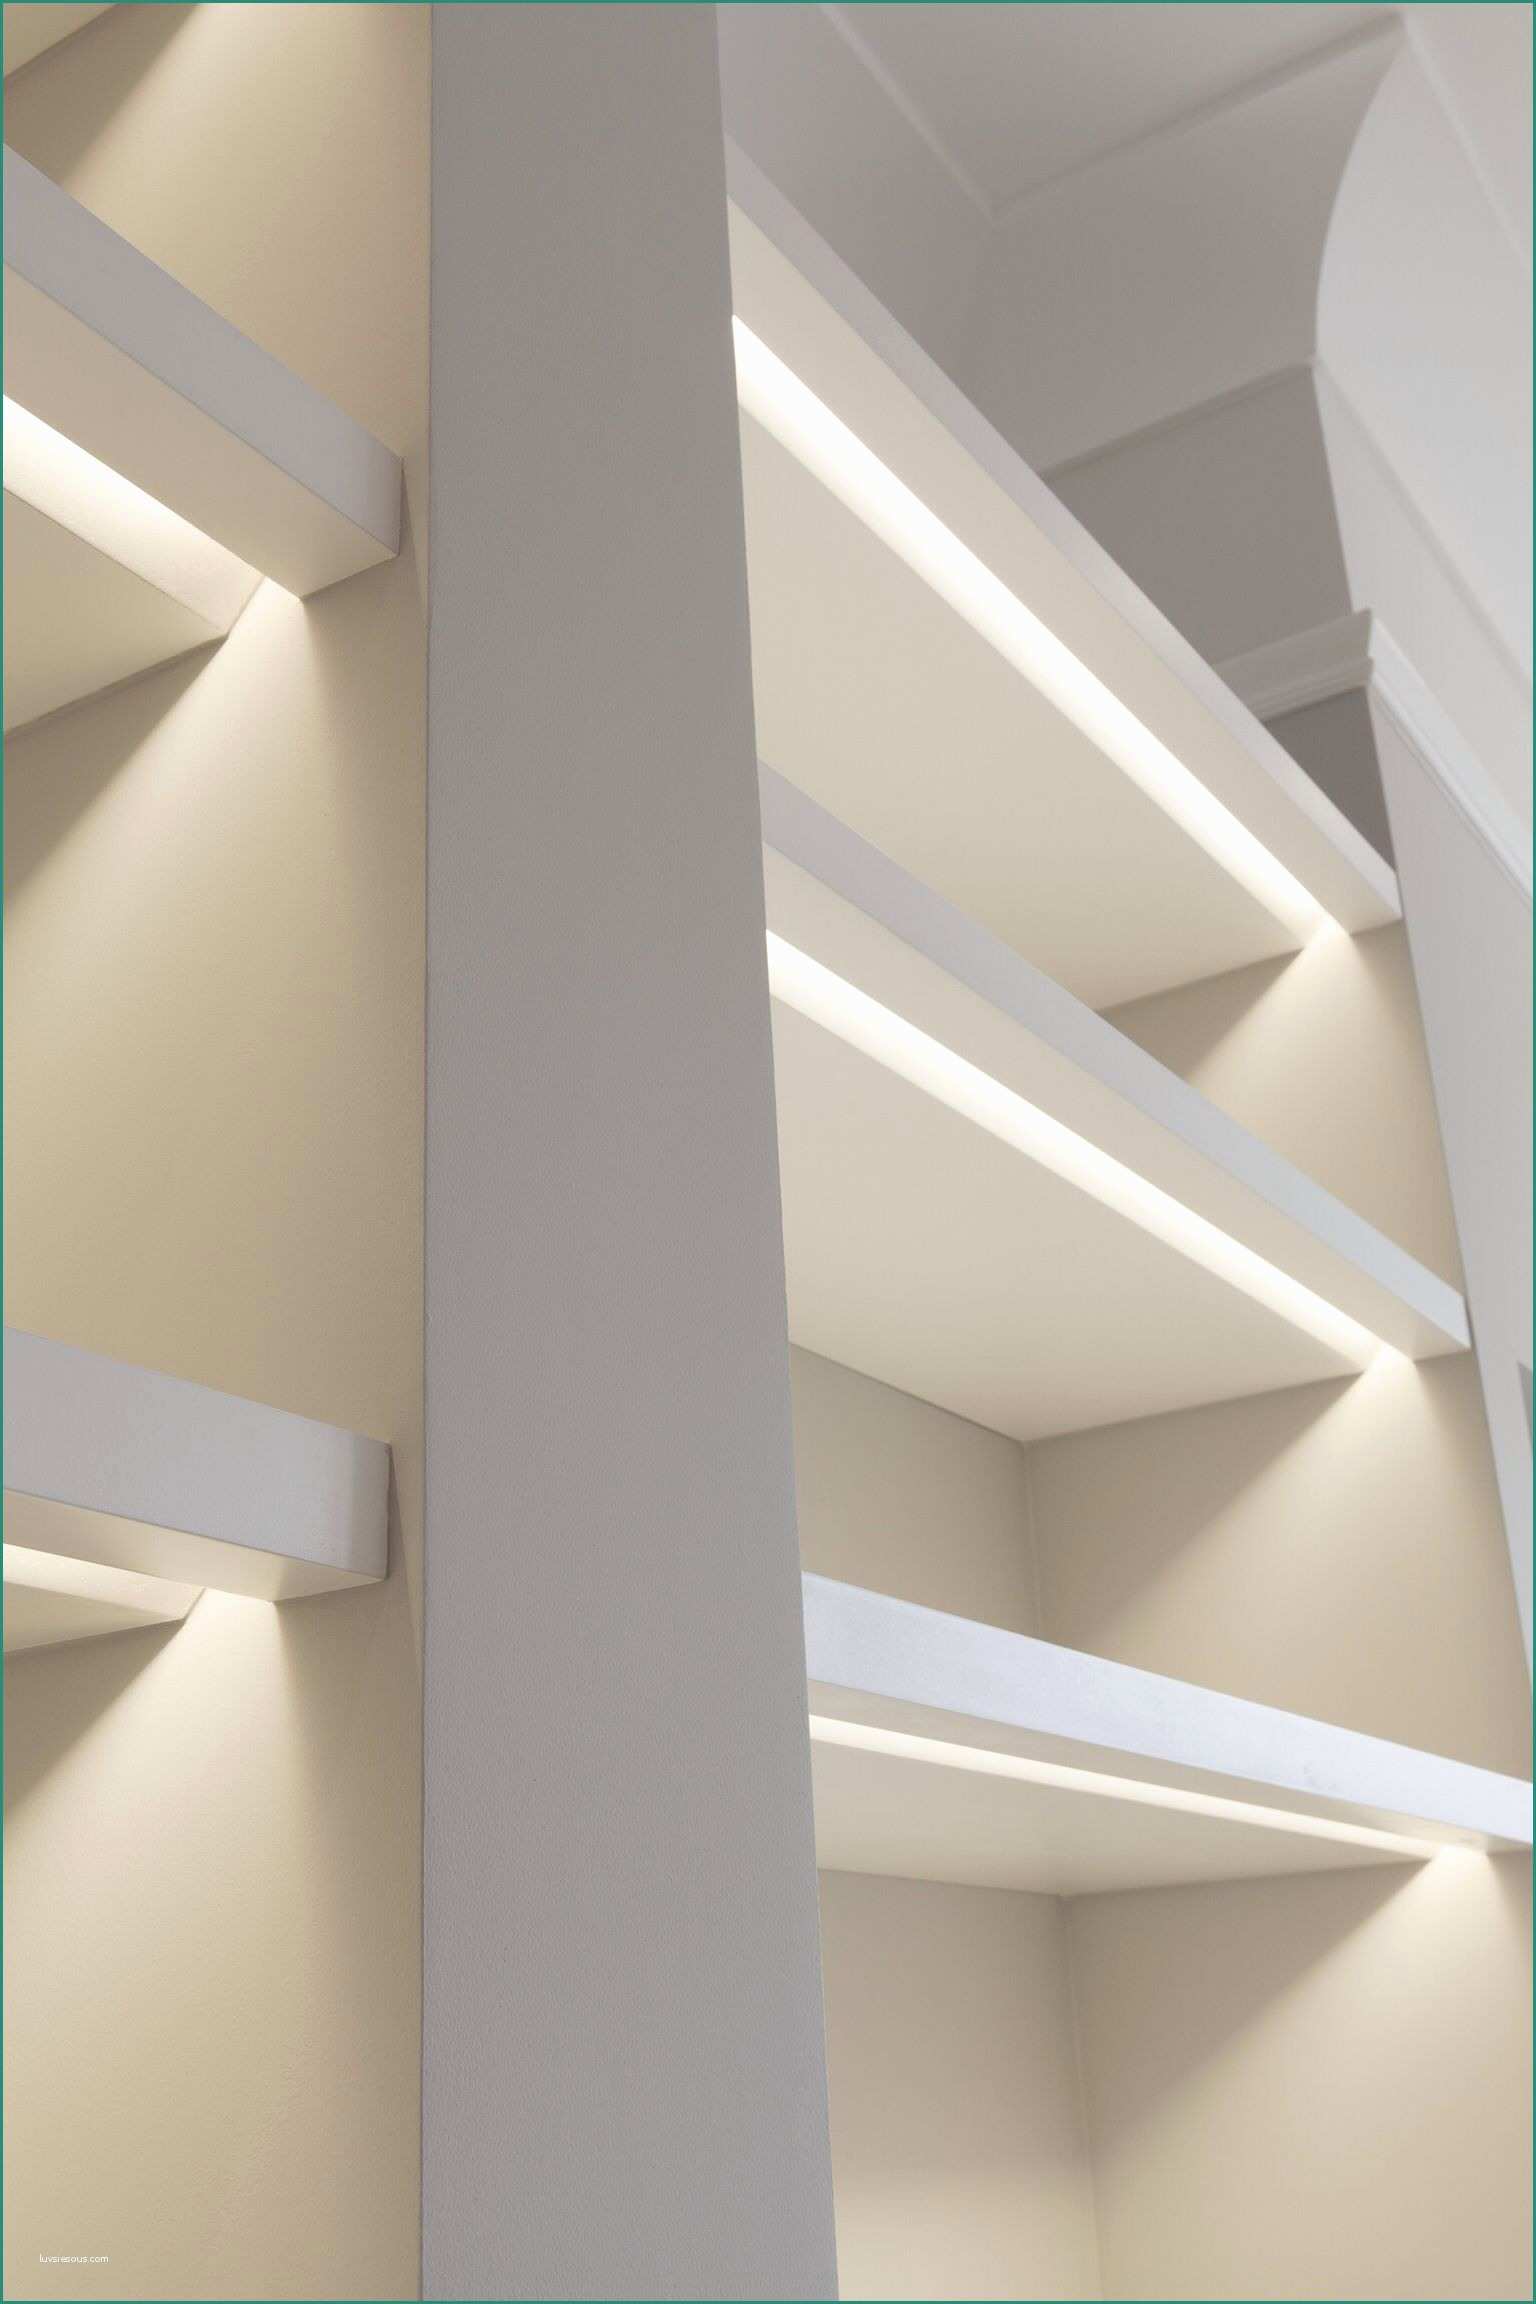 Illuminazione Bagno Design E Shelves Lit with Recessed Lights Note the Bevel to Allow Light to